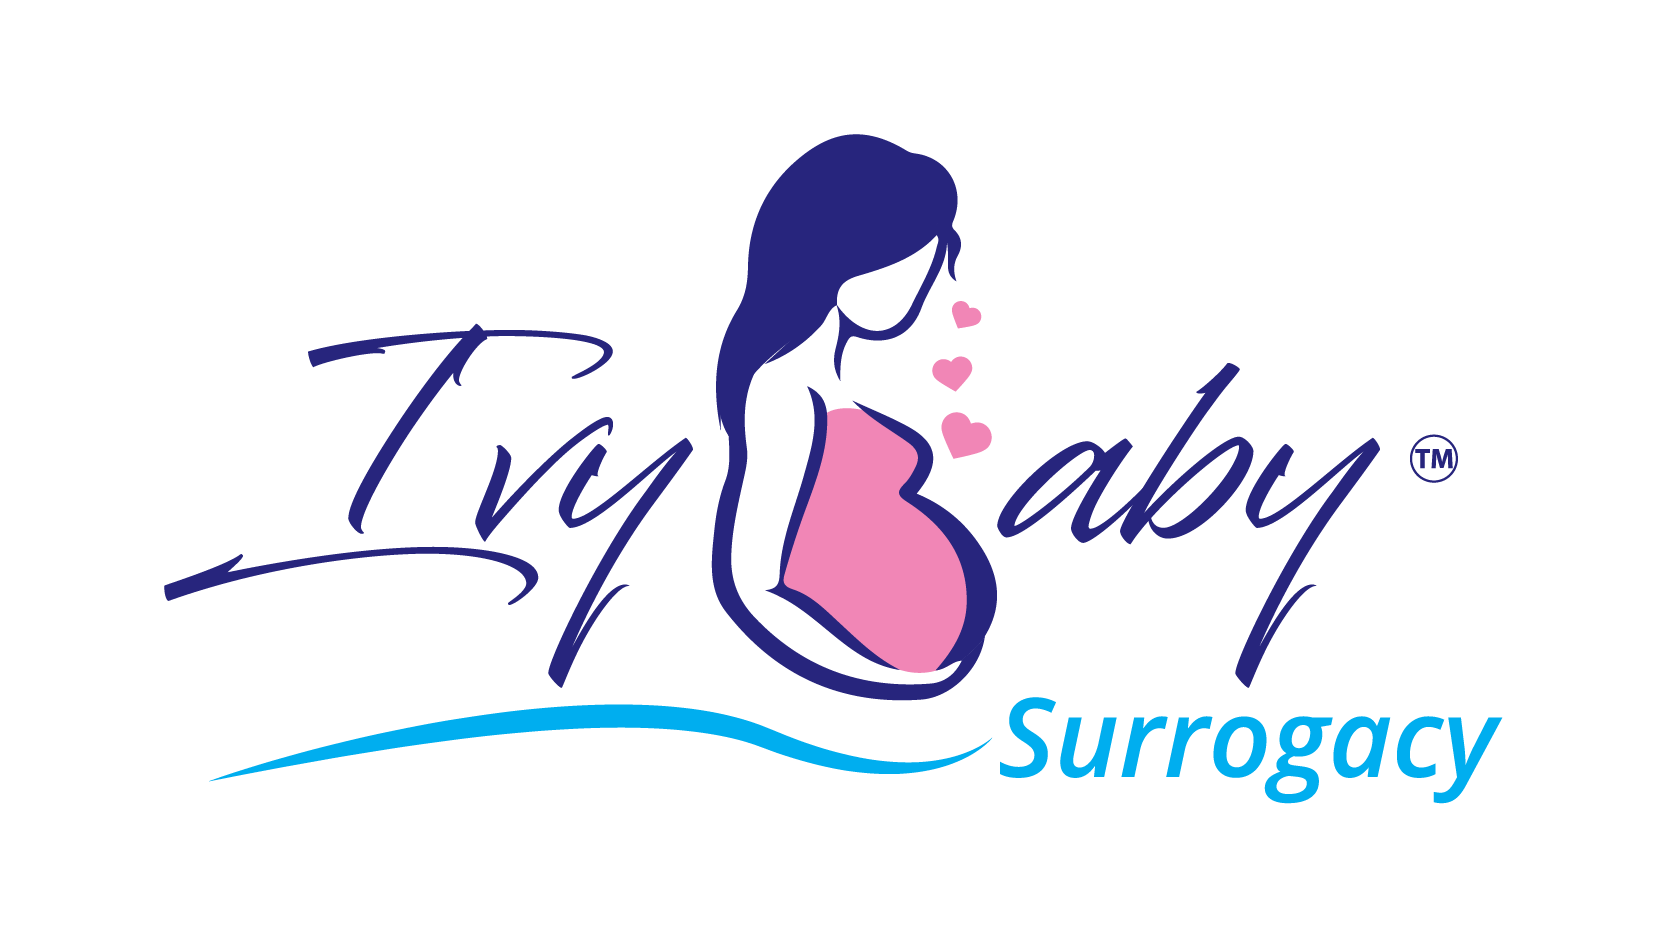 A LIFE CHANGING EXPERIENCE FOR SURROGATES